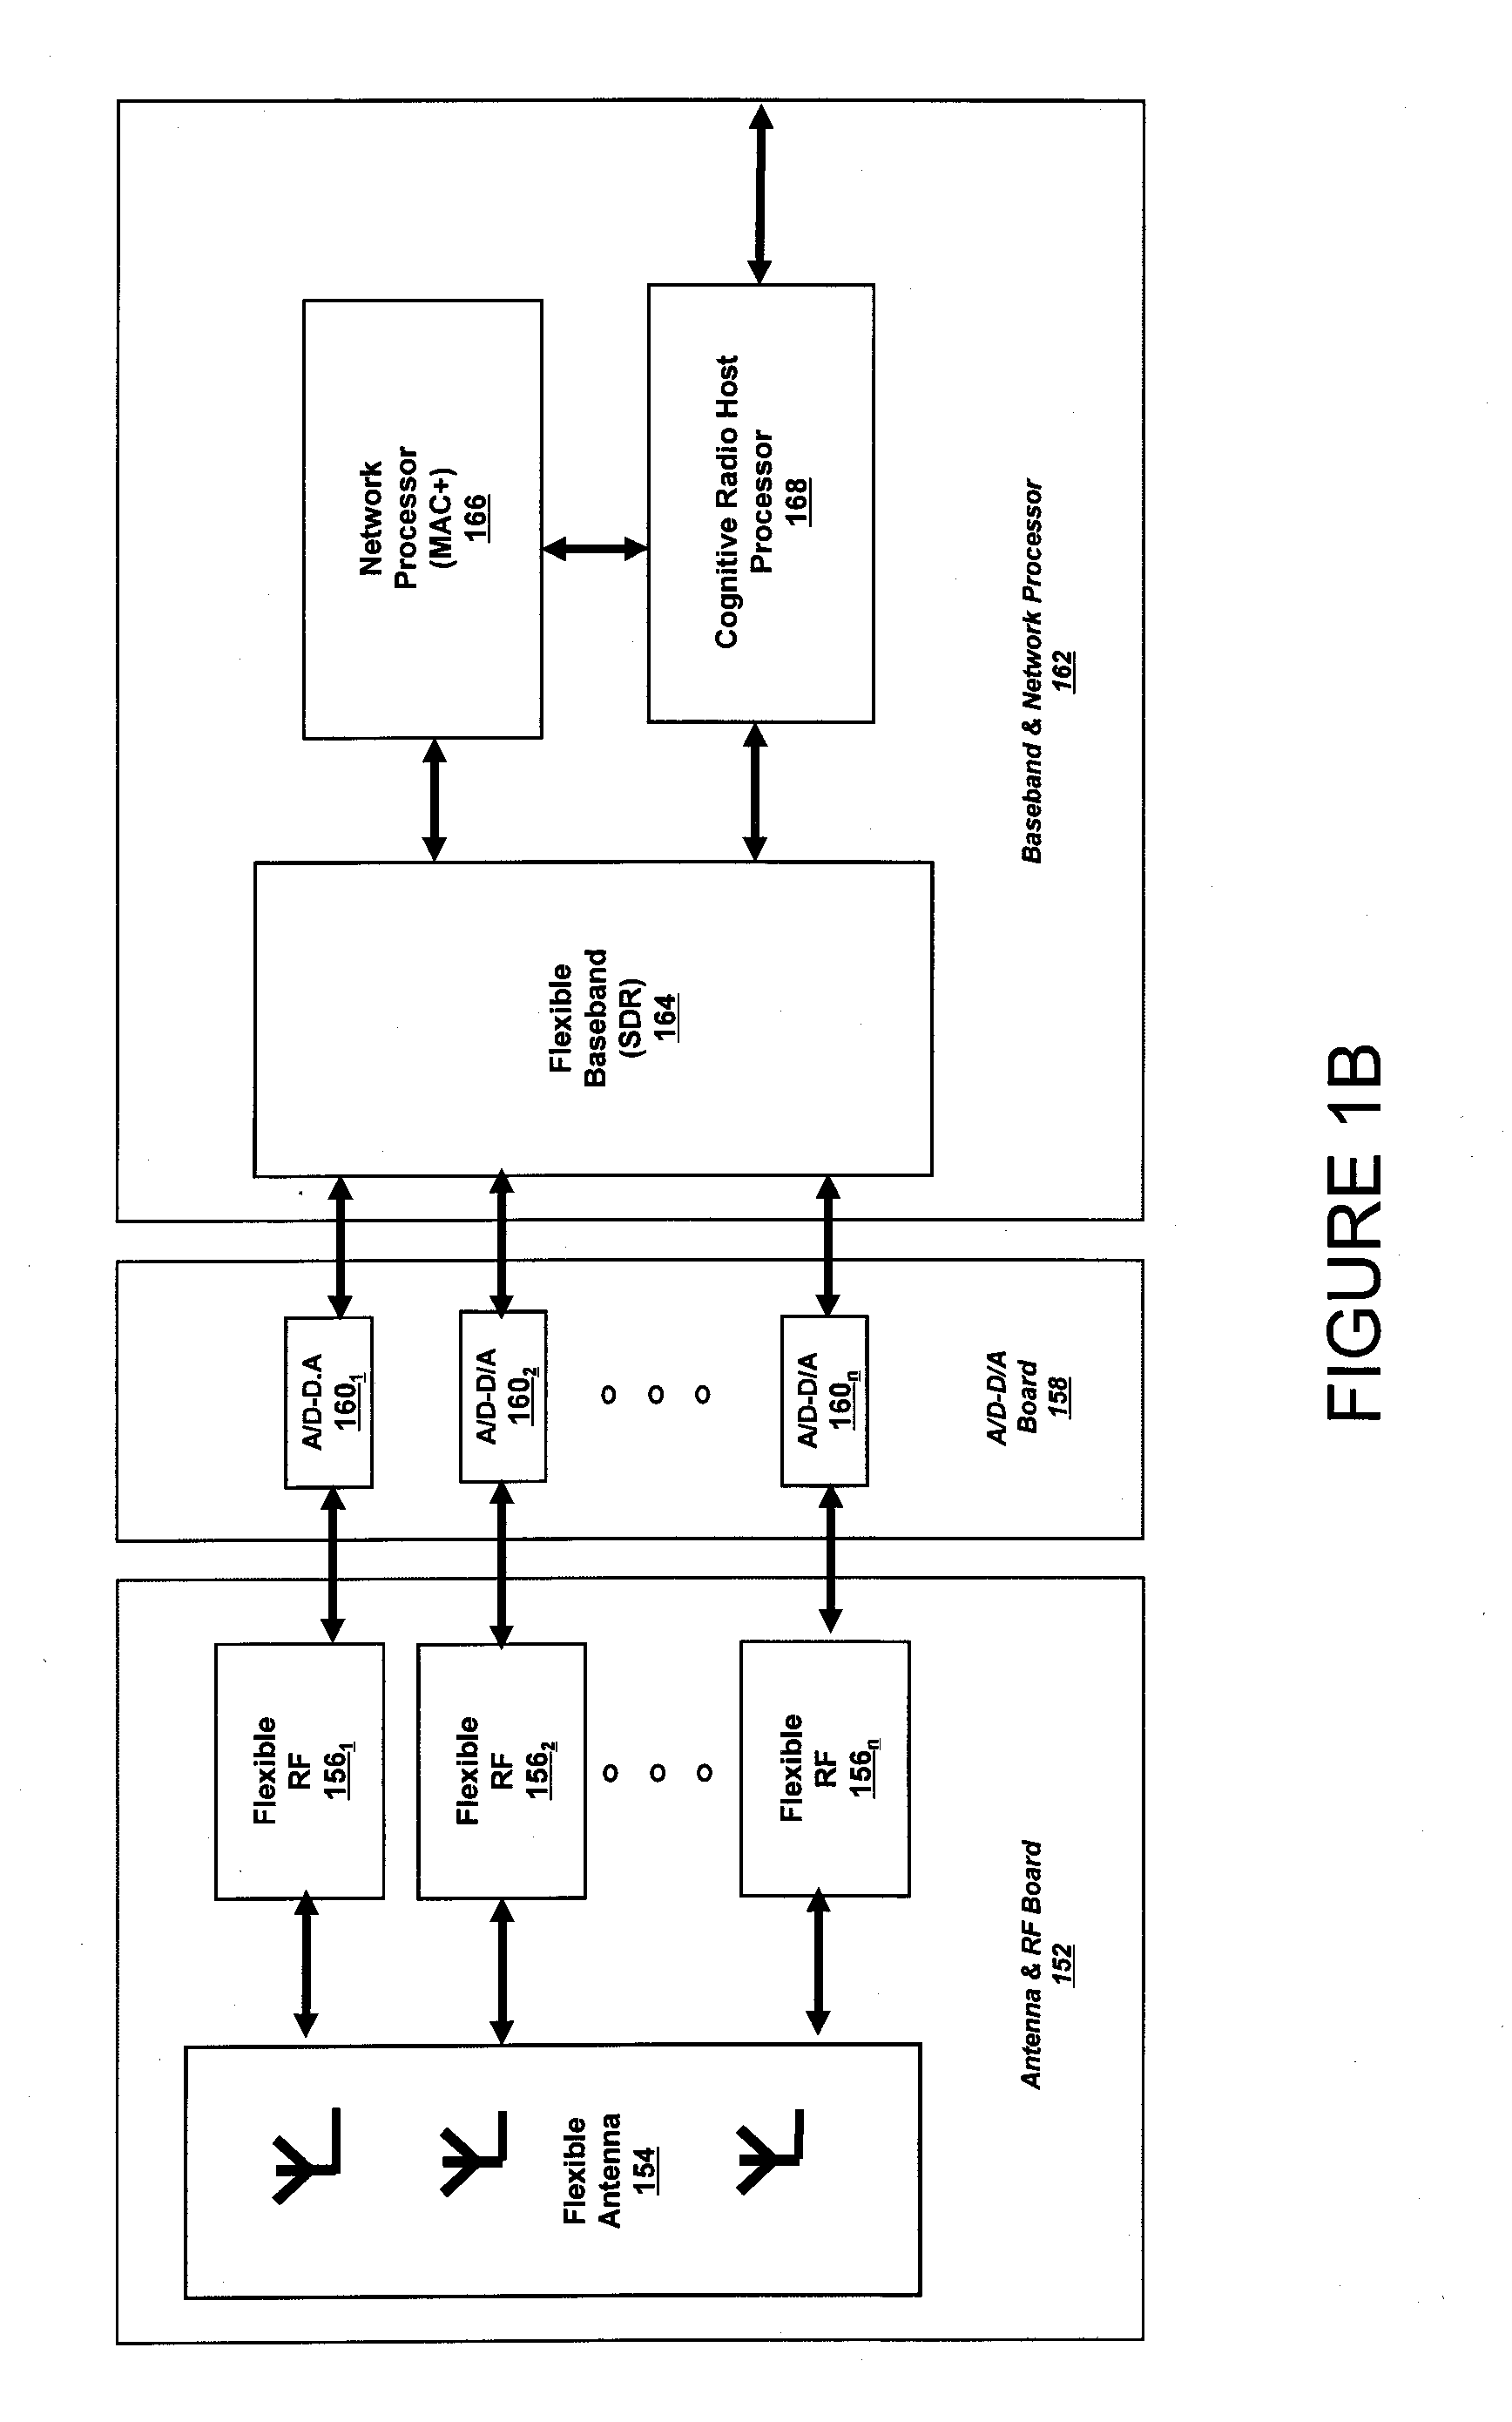 System and Method of Unlicensed Bi-Directional Communications Over an Ultra-High Frequency (UHF) Band Reserved for Licensed Communications